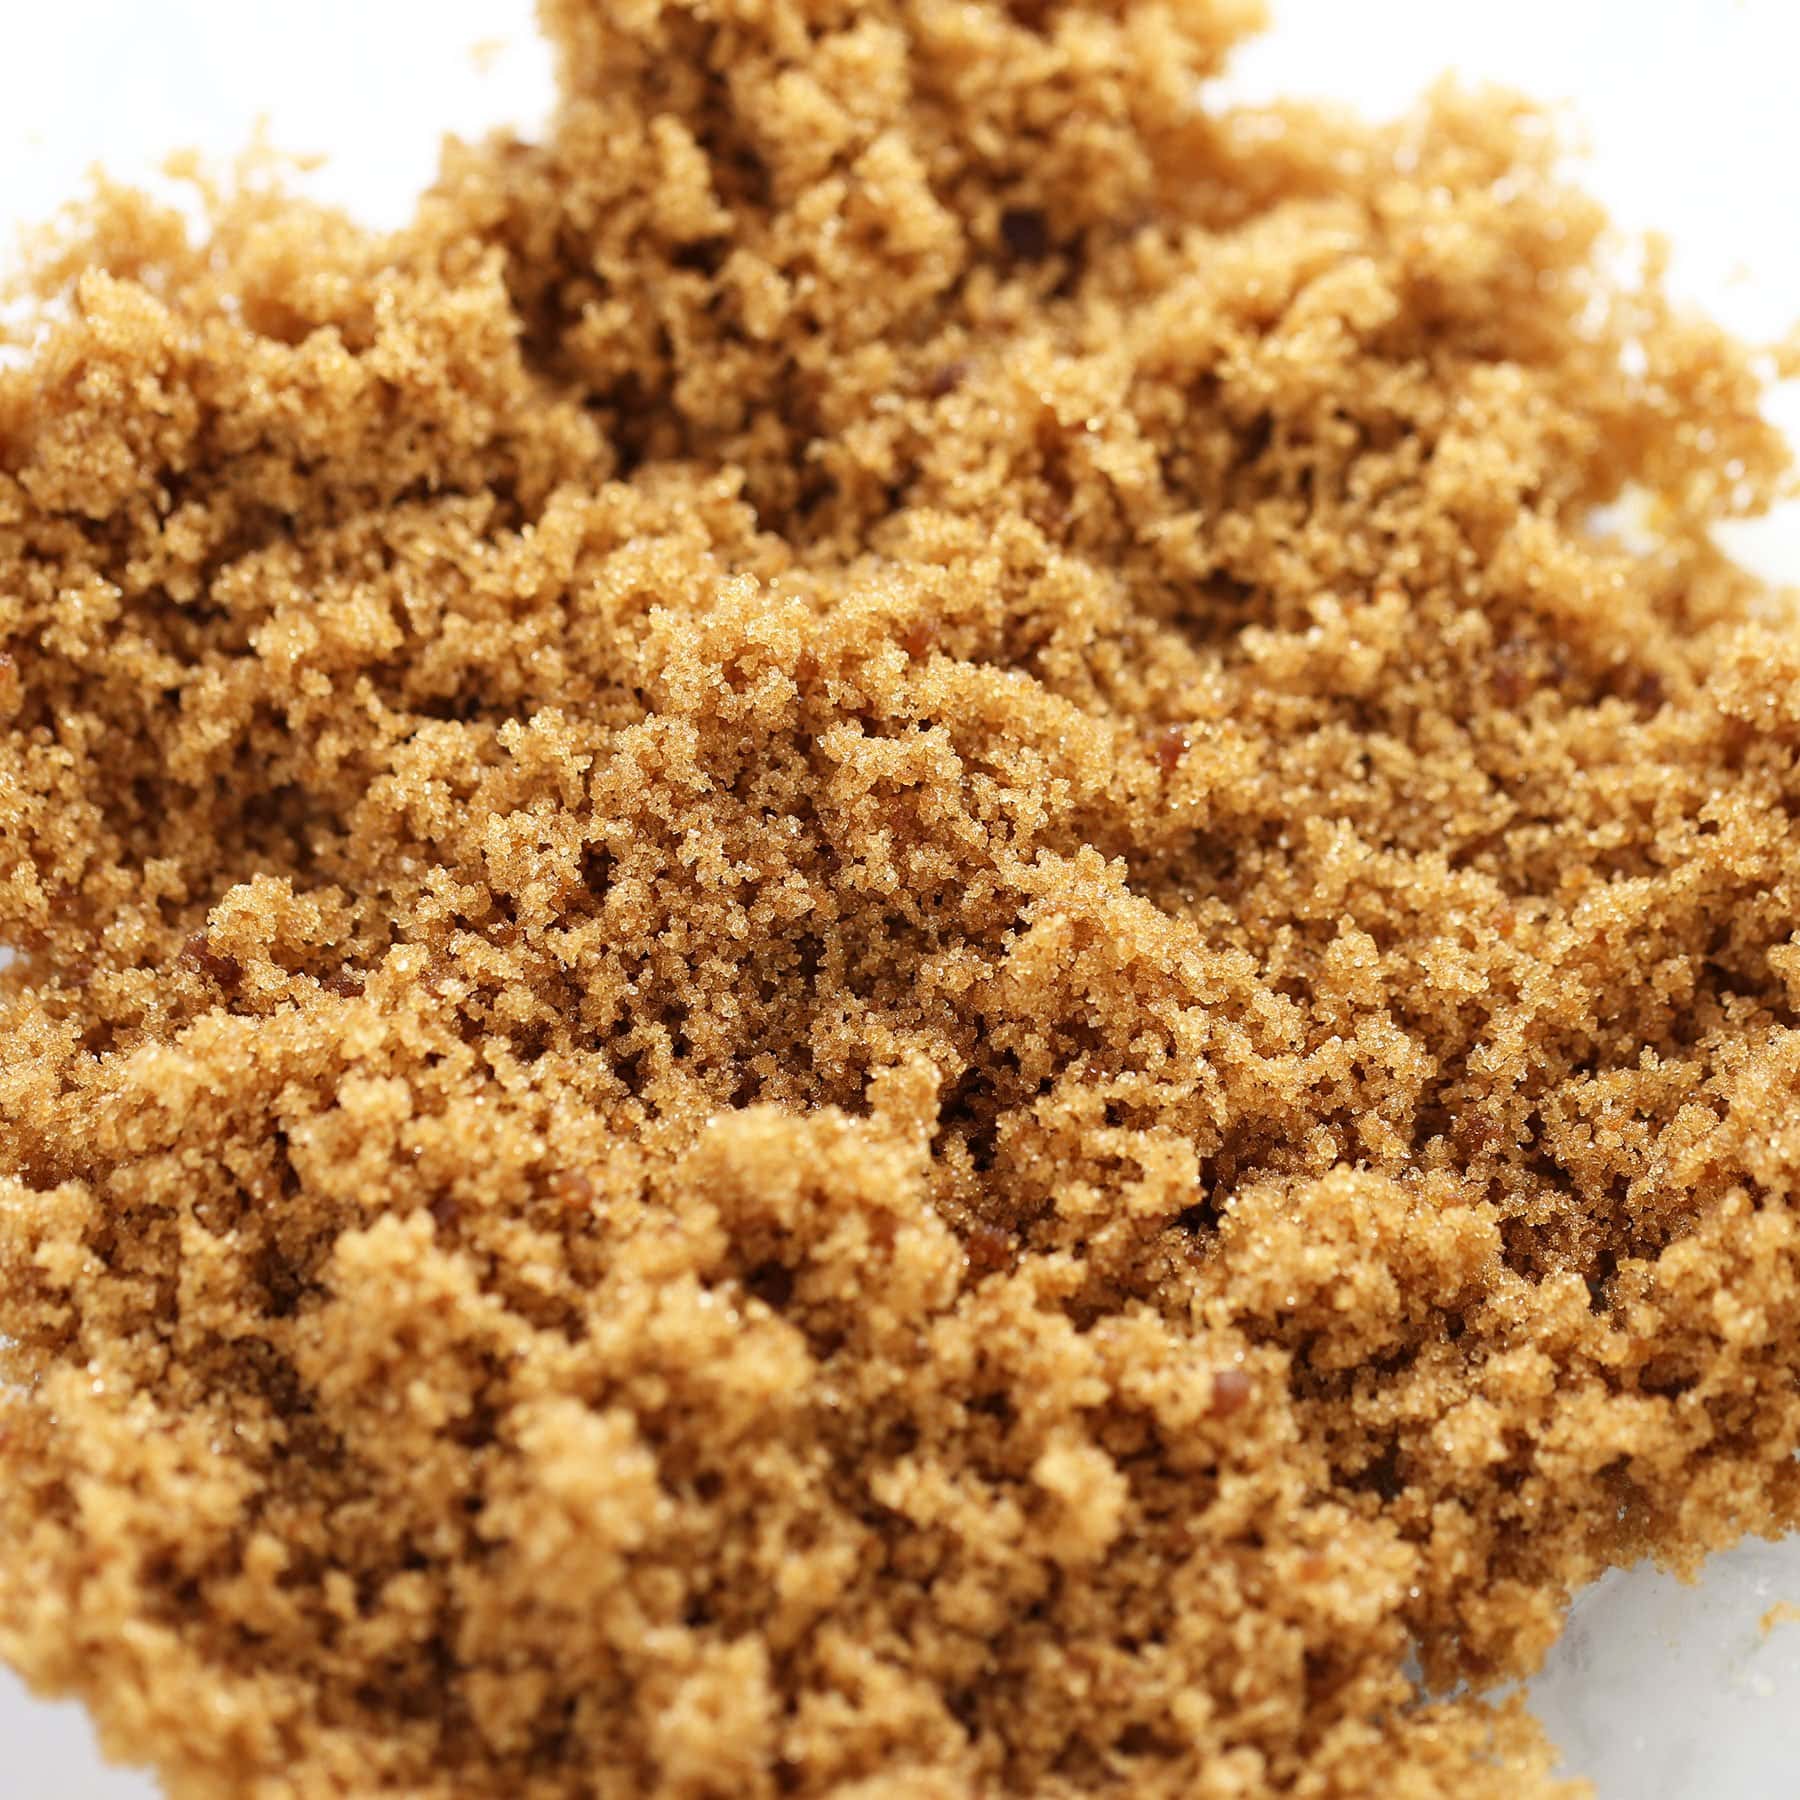 Learn How to Make Brown Sugar in less than 5 minutes and my trick for keeping it perfectly soft and lump-free. Plus some interesting science tips about brown sugar in baking!